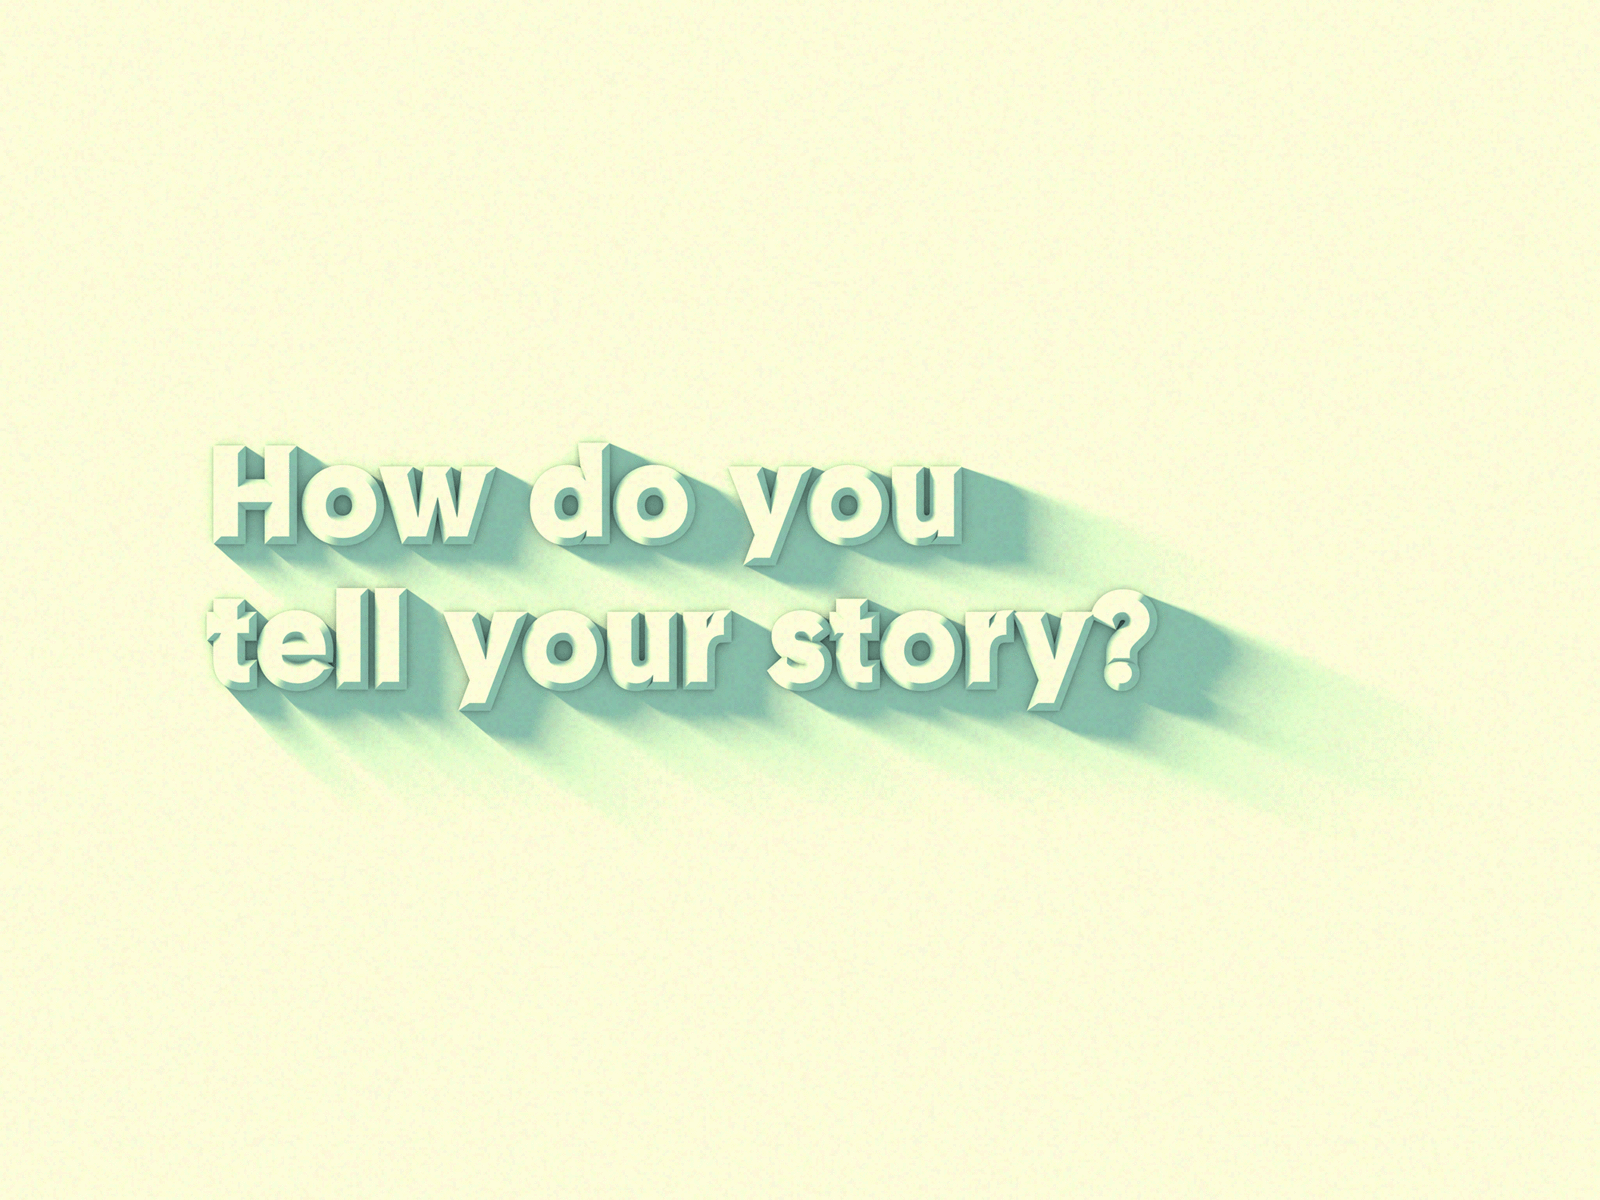 How do you tell your story?